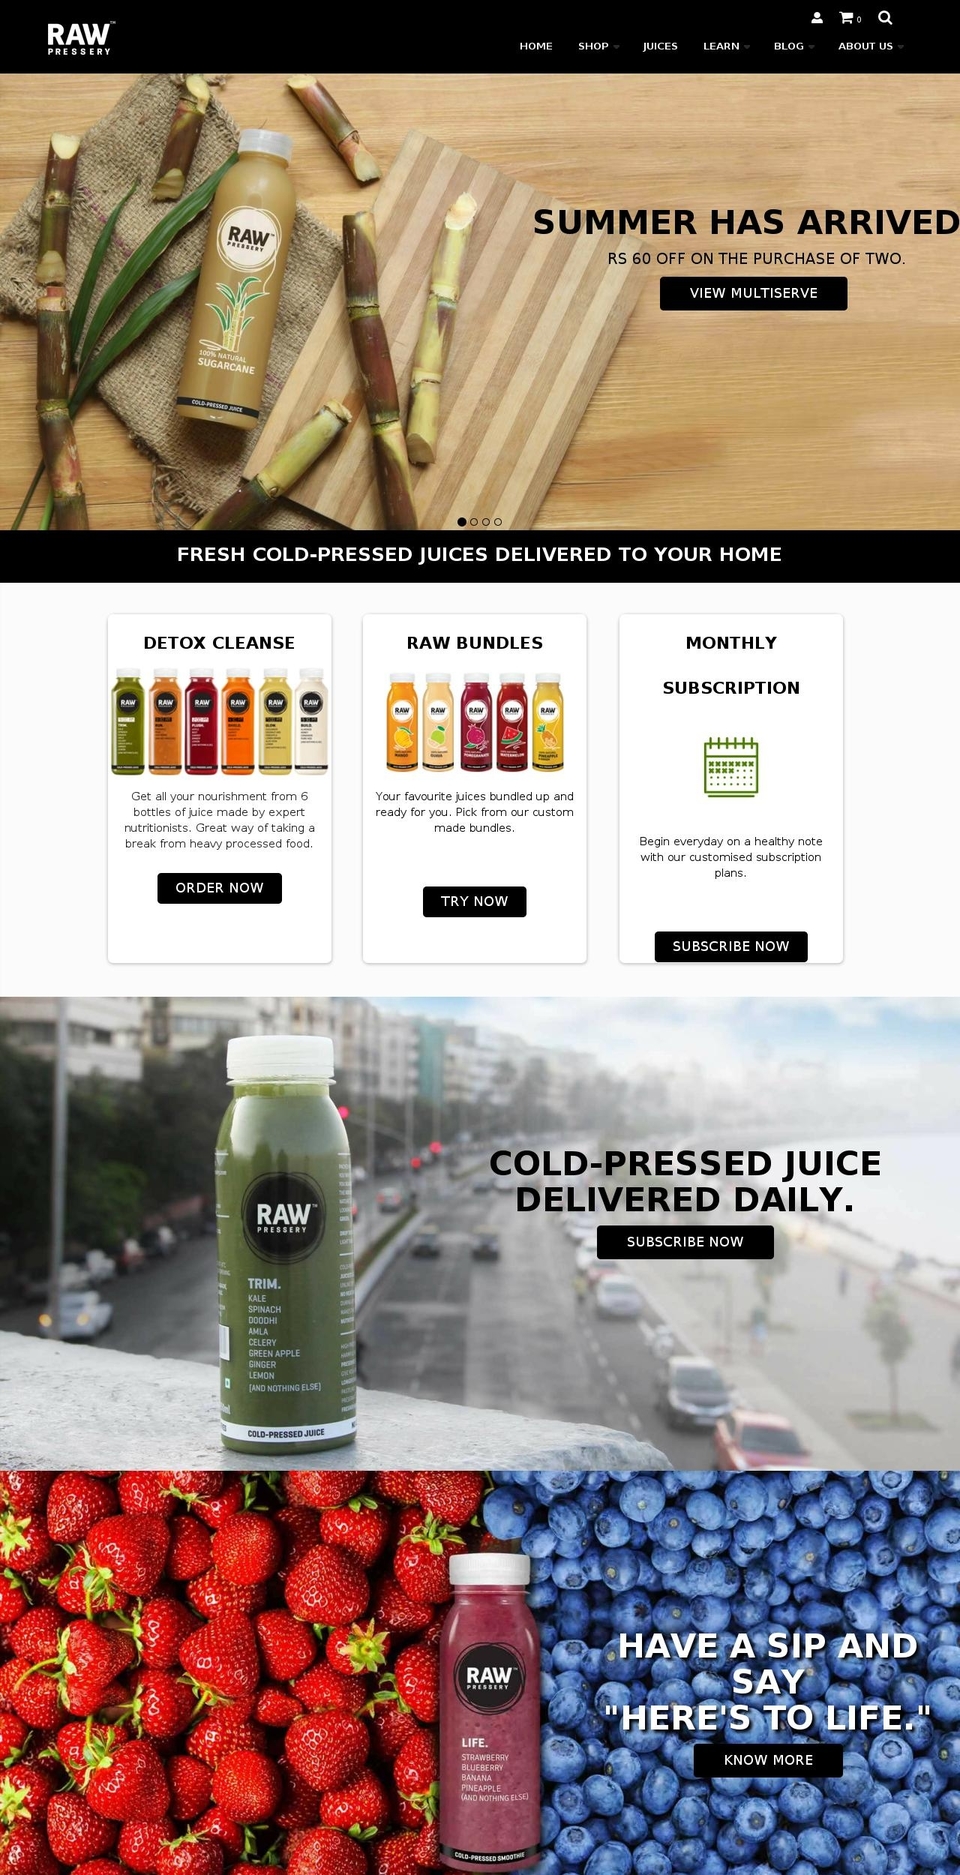 Be Yours Shopify theme site example rawpressery.com